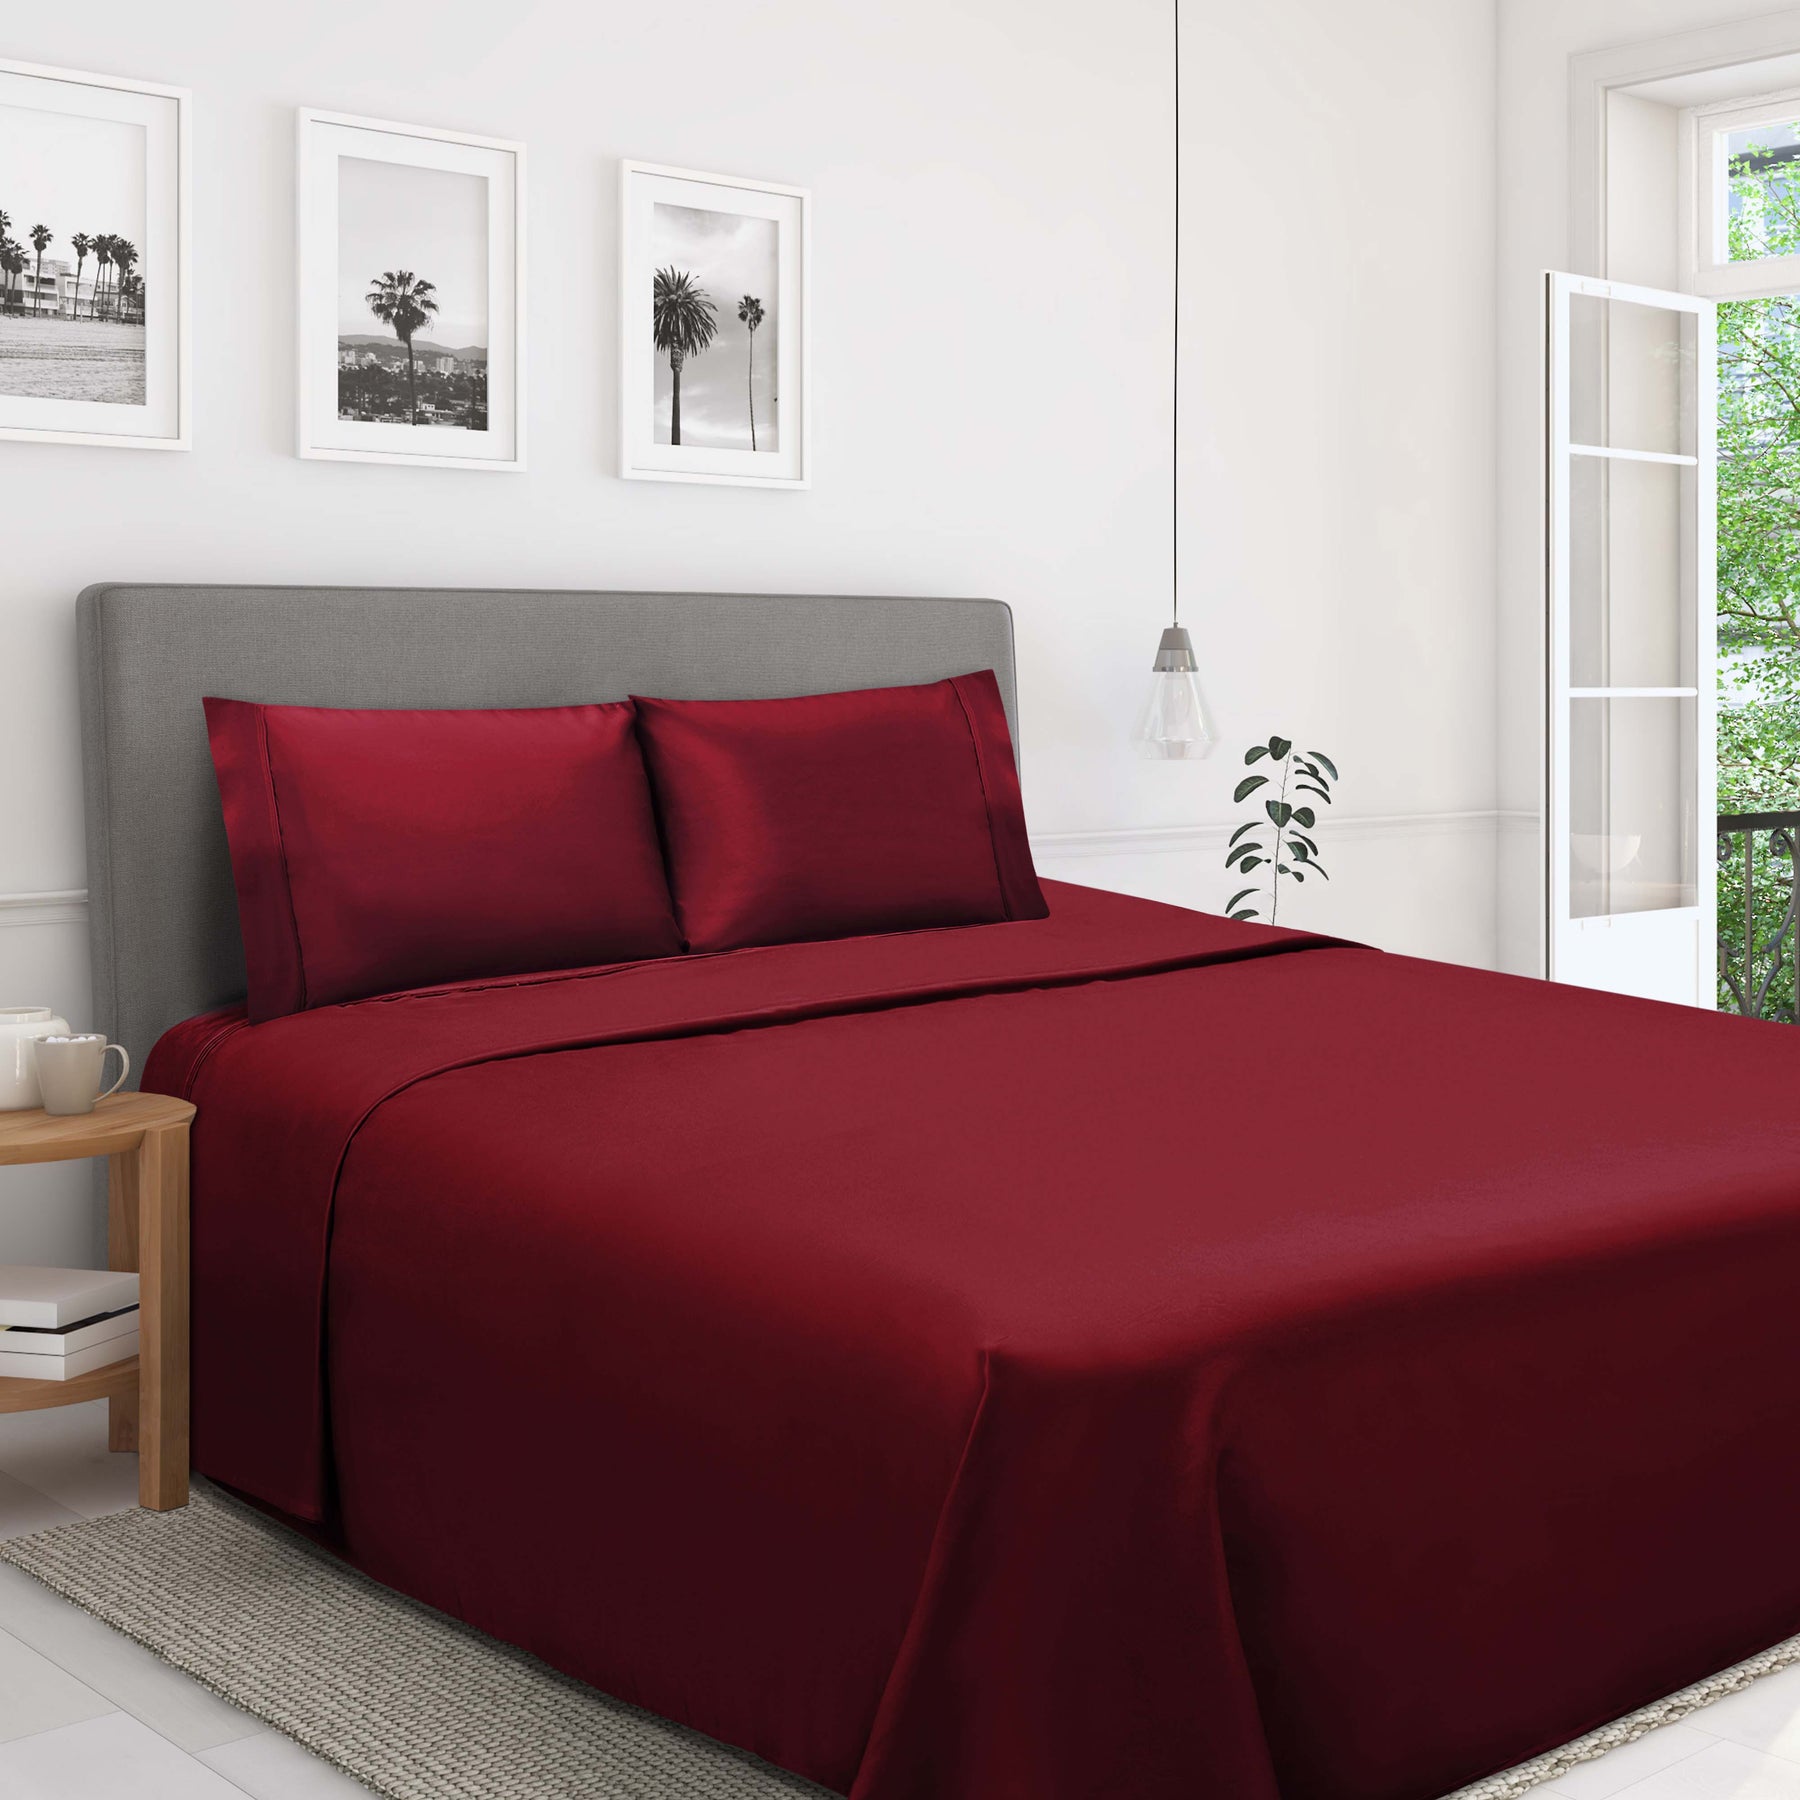 Egyptian Cotton 1200 Thread Count Eco-Friendly Solid Sheet Set - Burgundy